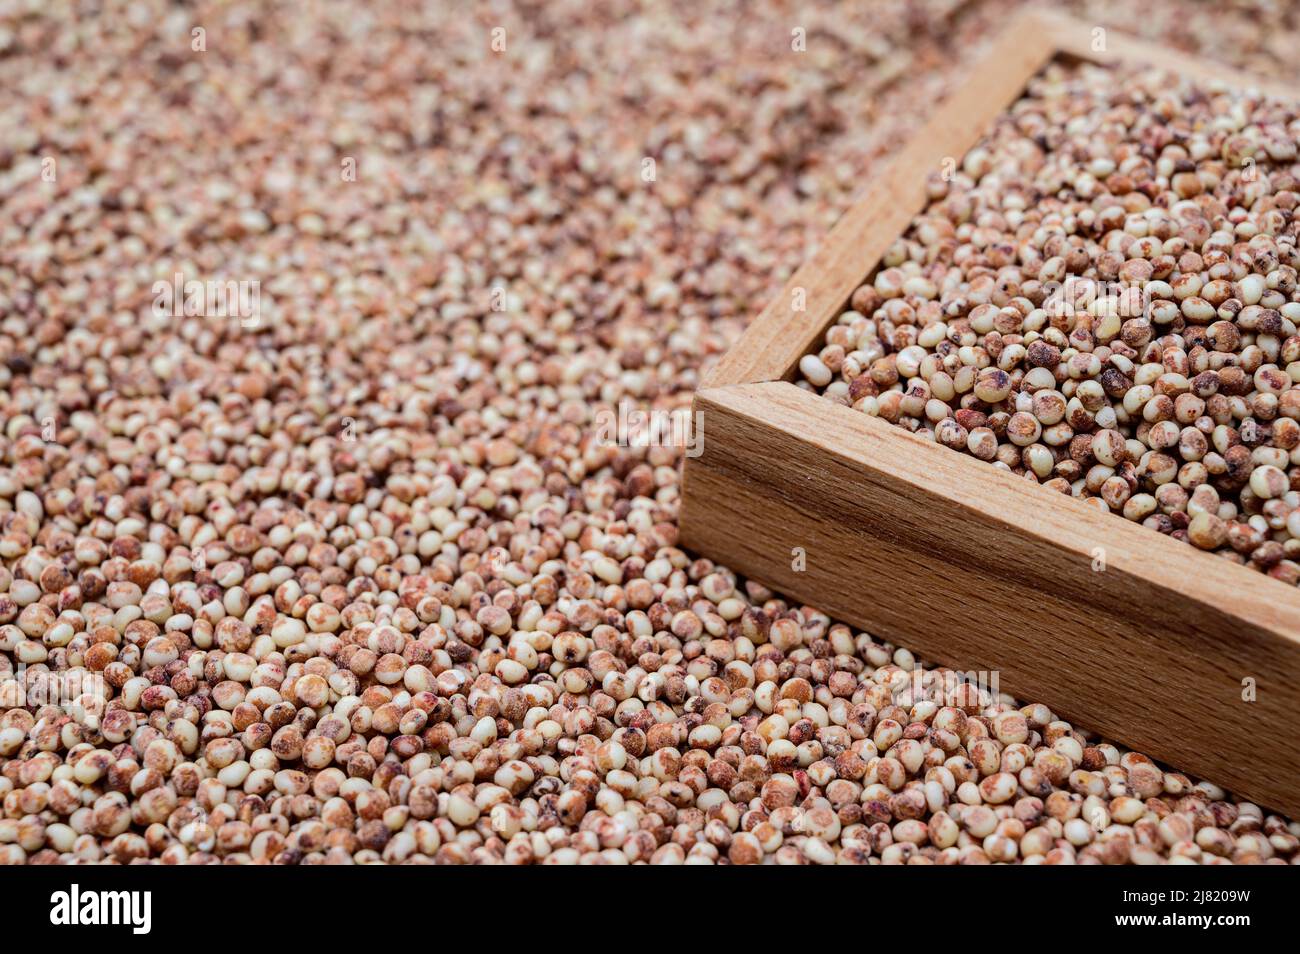 A background with sorghum stacked and a wooden bowl containing sorghum. Stock Photo